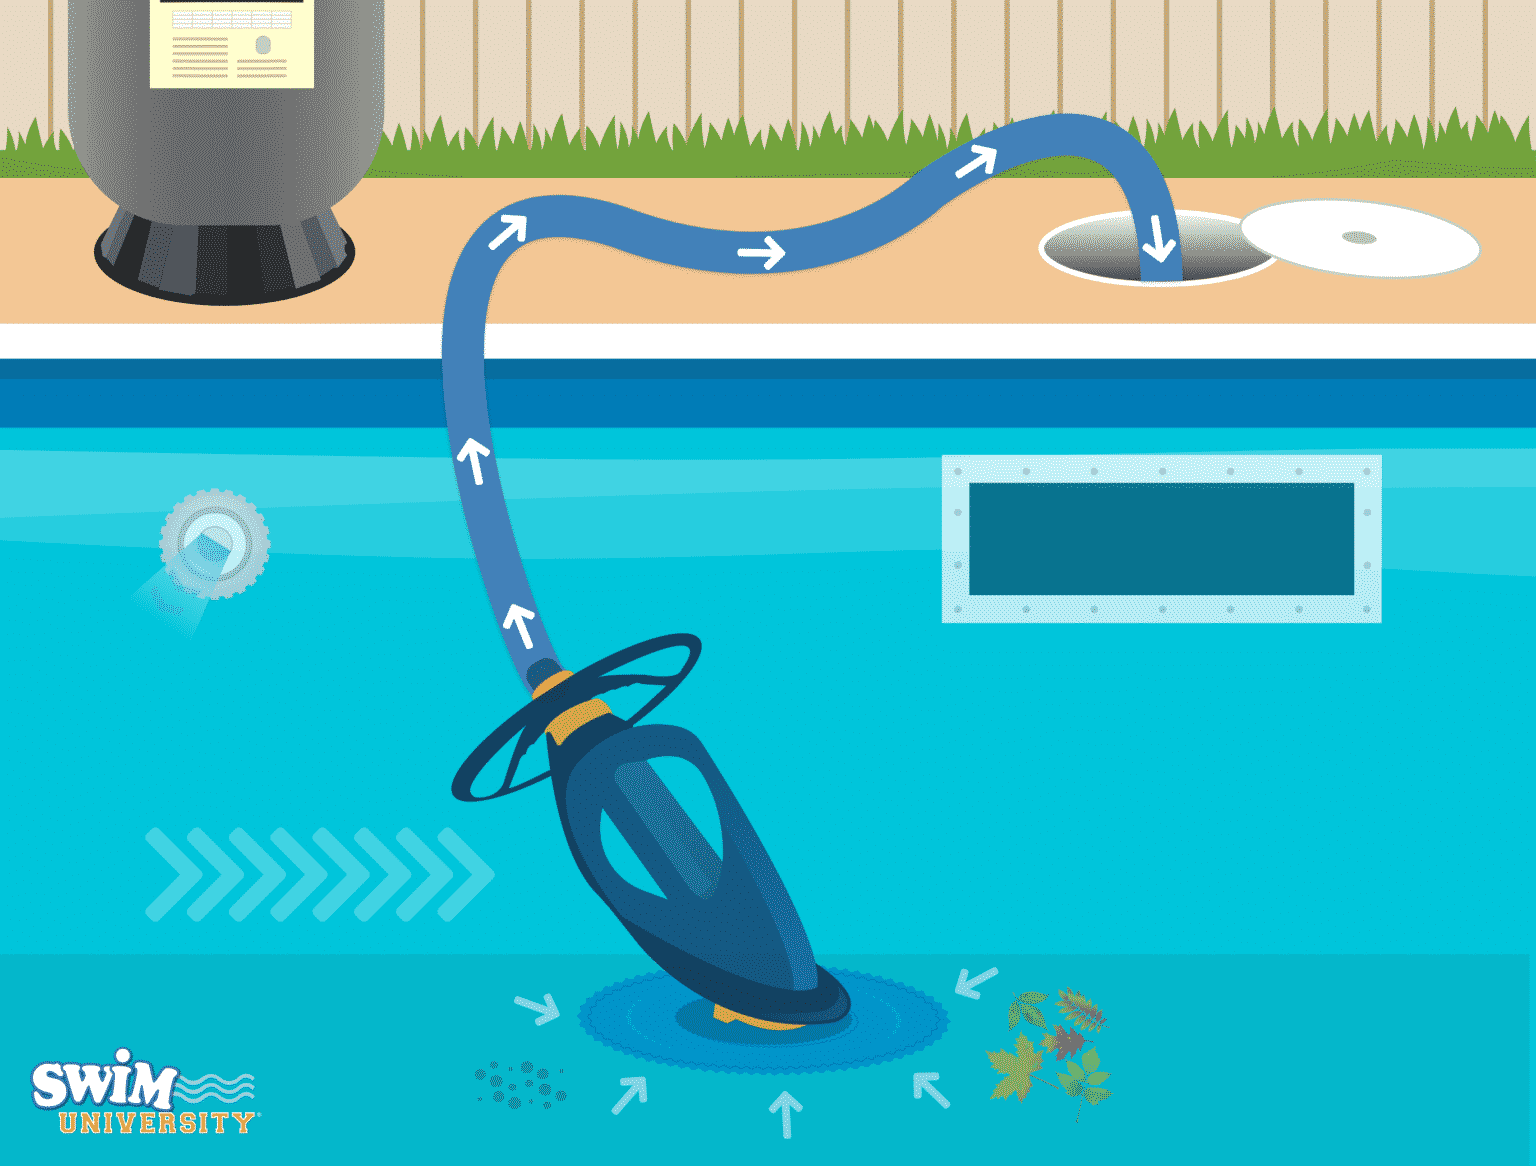 Best Above Ground Pool Pumps of 2022 - Pool Magazine